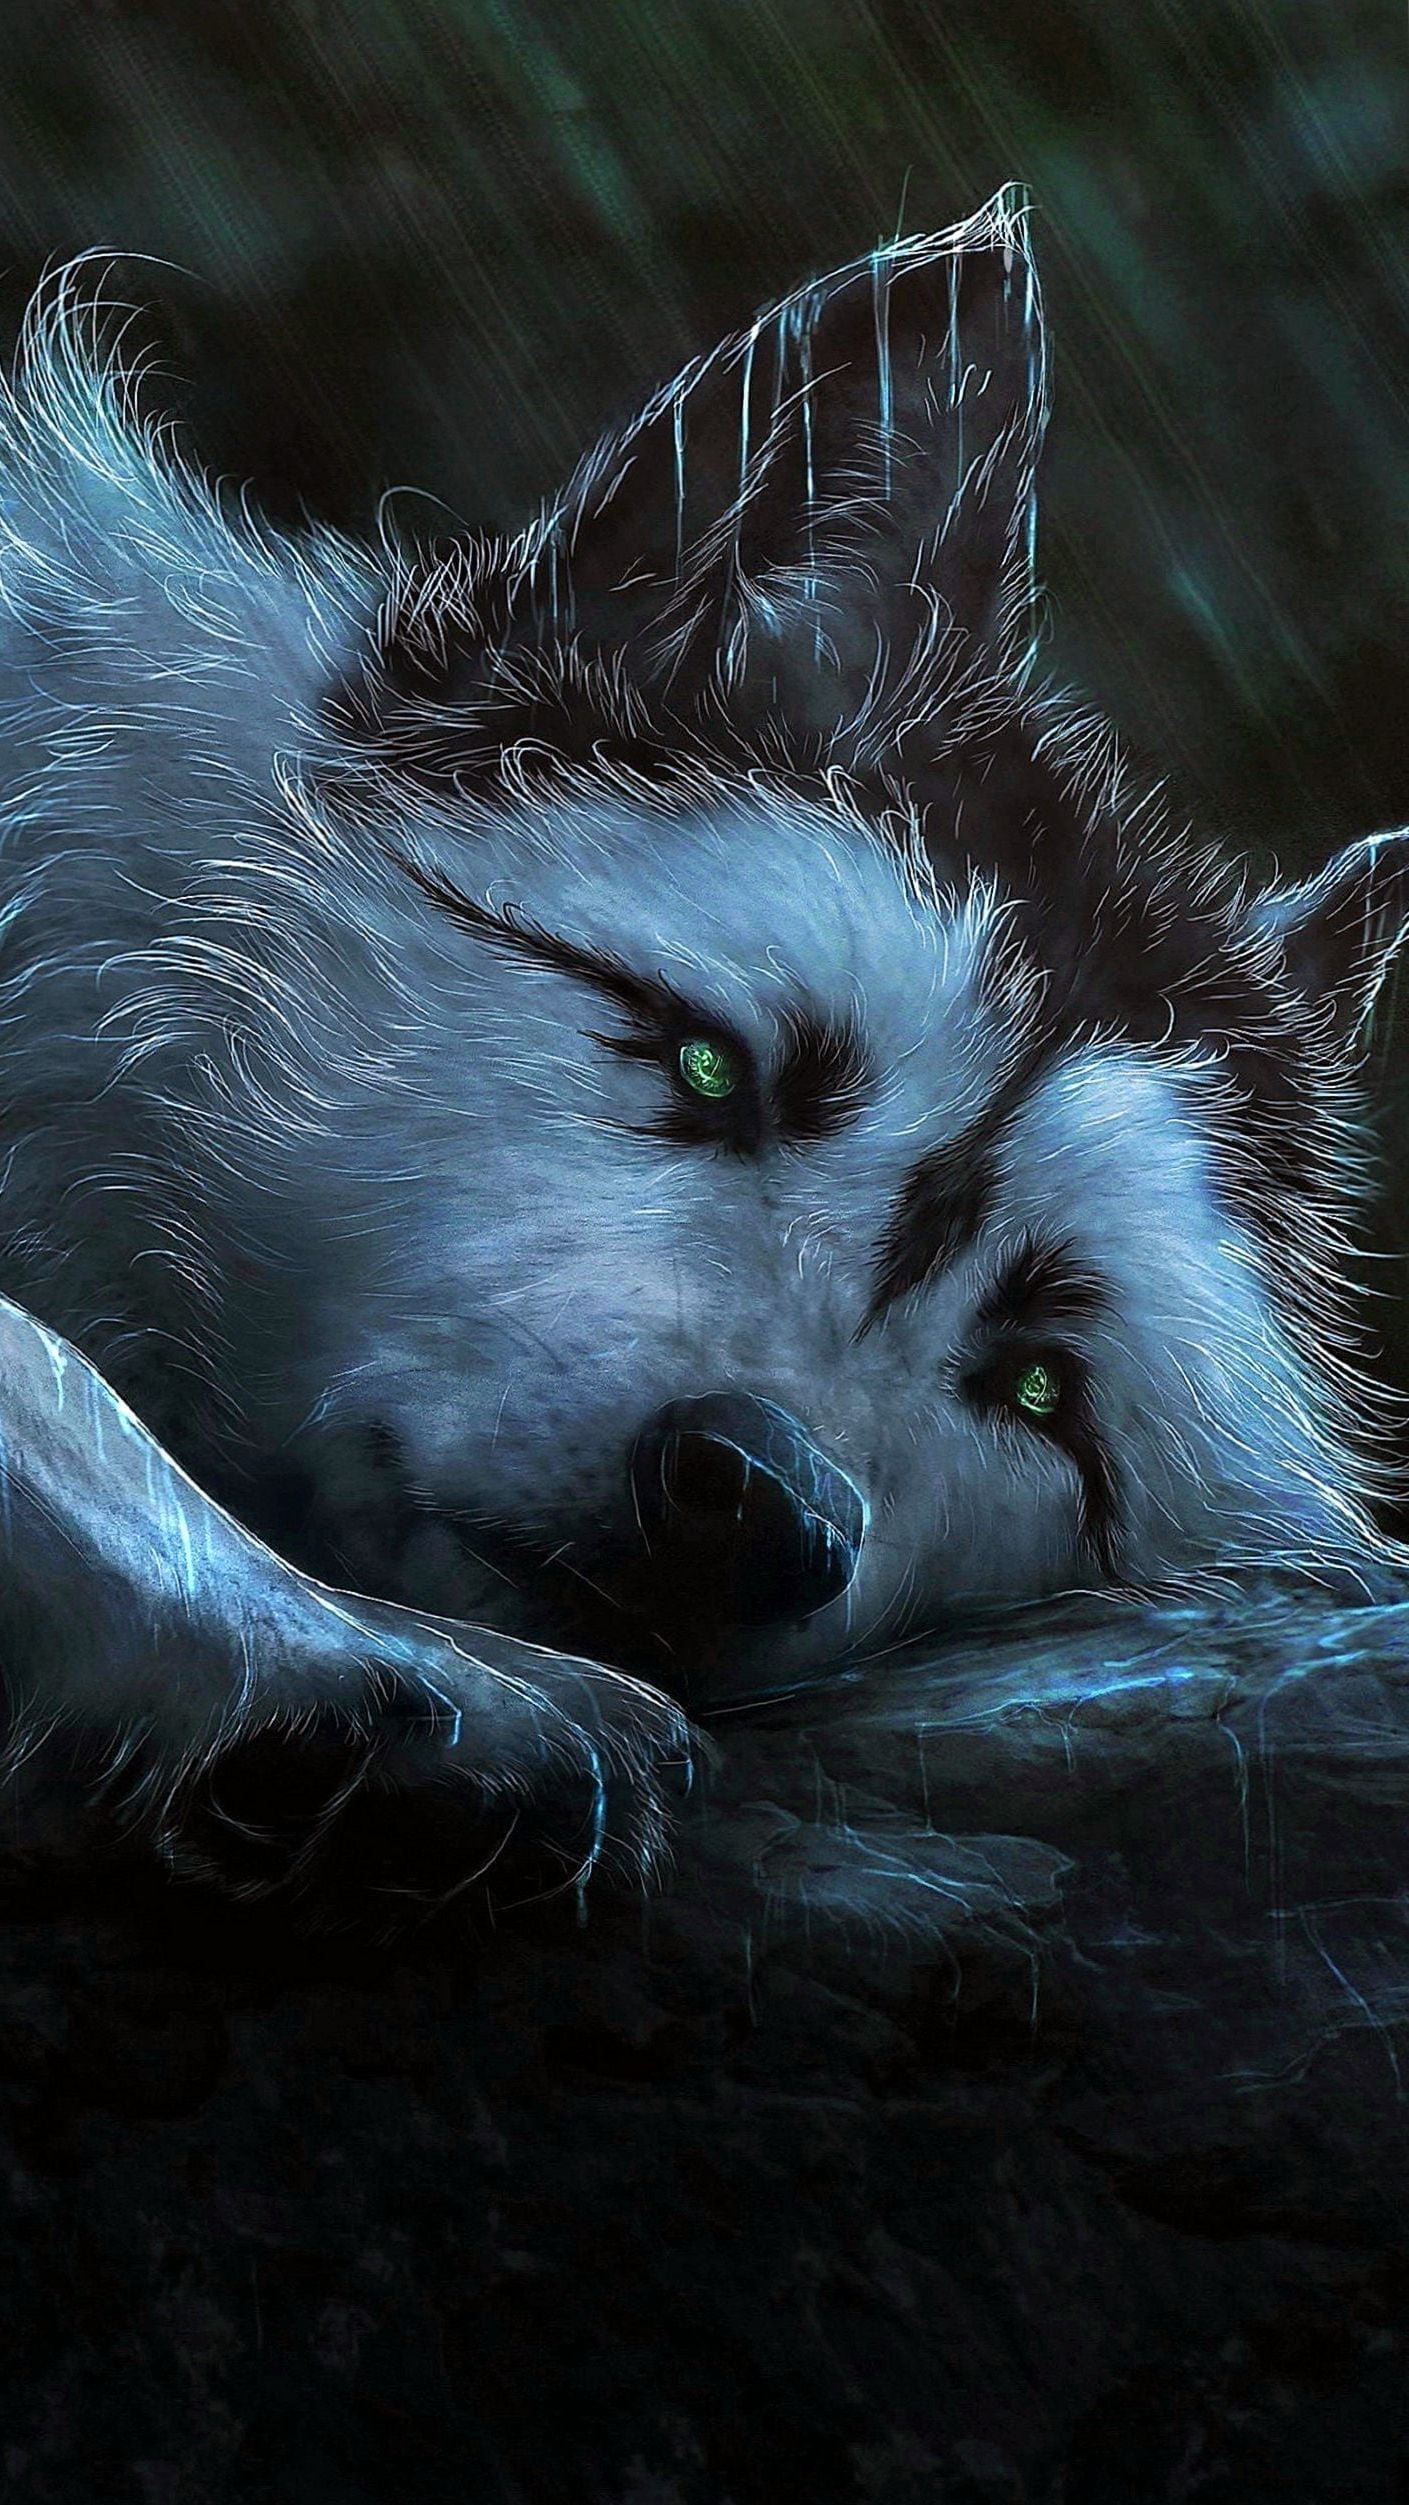 wallpapers s6 edge,canidae,wolf,darkness,wildlife,fictional character